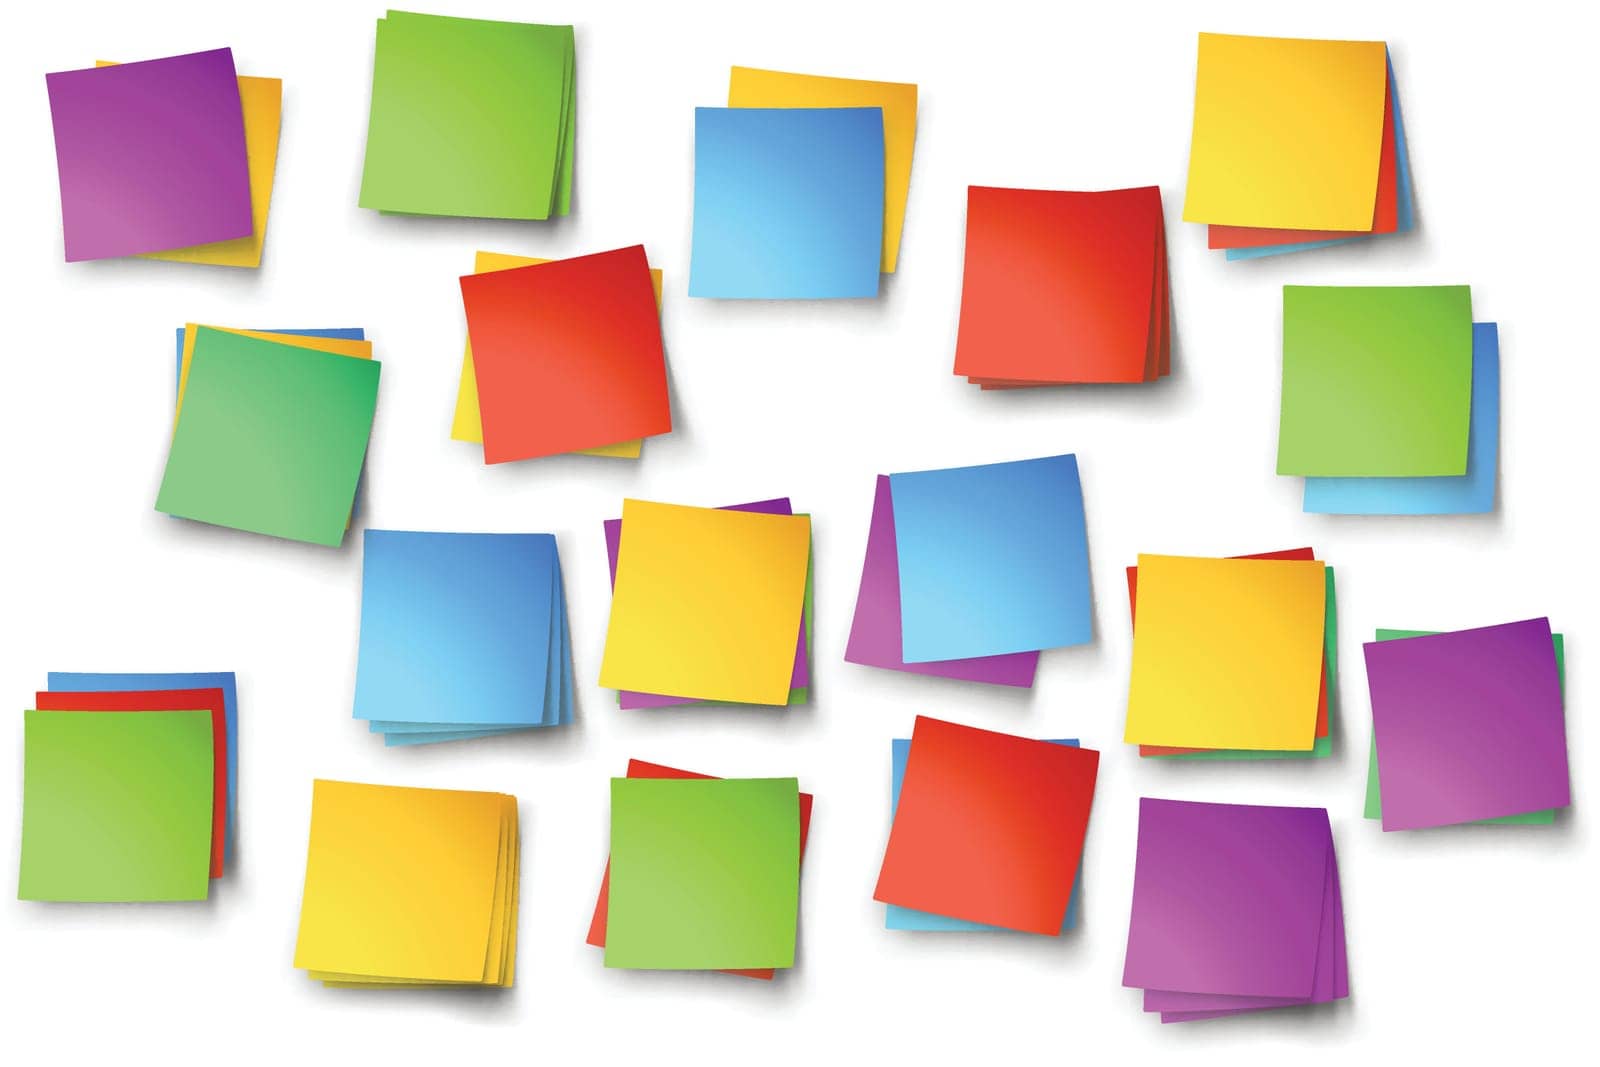 illustration of paper lists set with different shapes and color